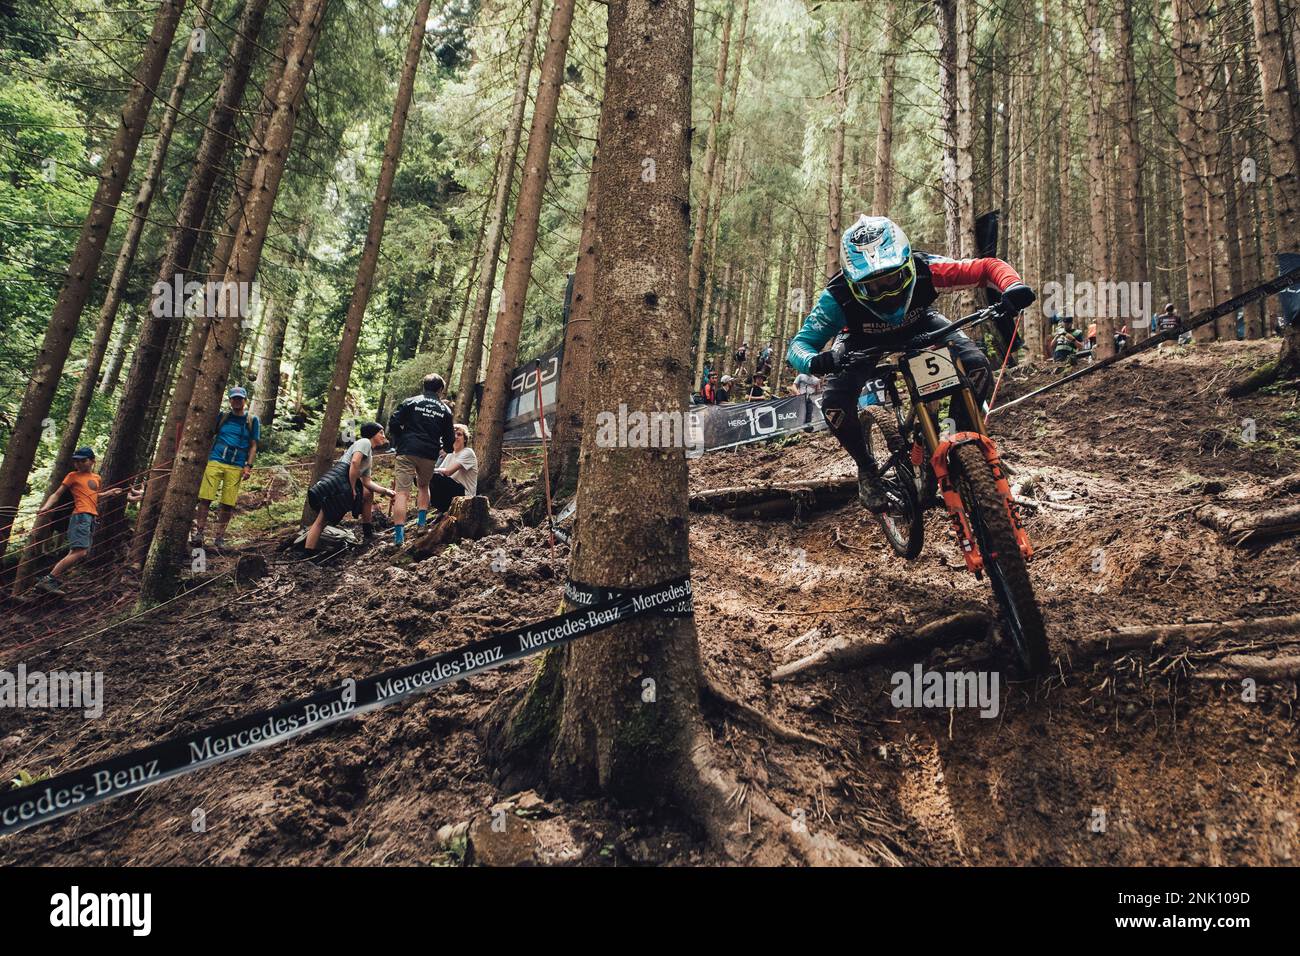 Matt Walker won his first UCI Mountain Bike World Cup race at Leogang on  Saturday to make it a British 1-2 in the men's event as Switzerland's  Camille Balanche maintained her great